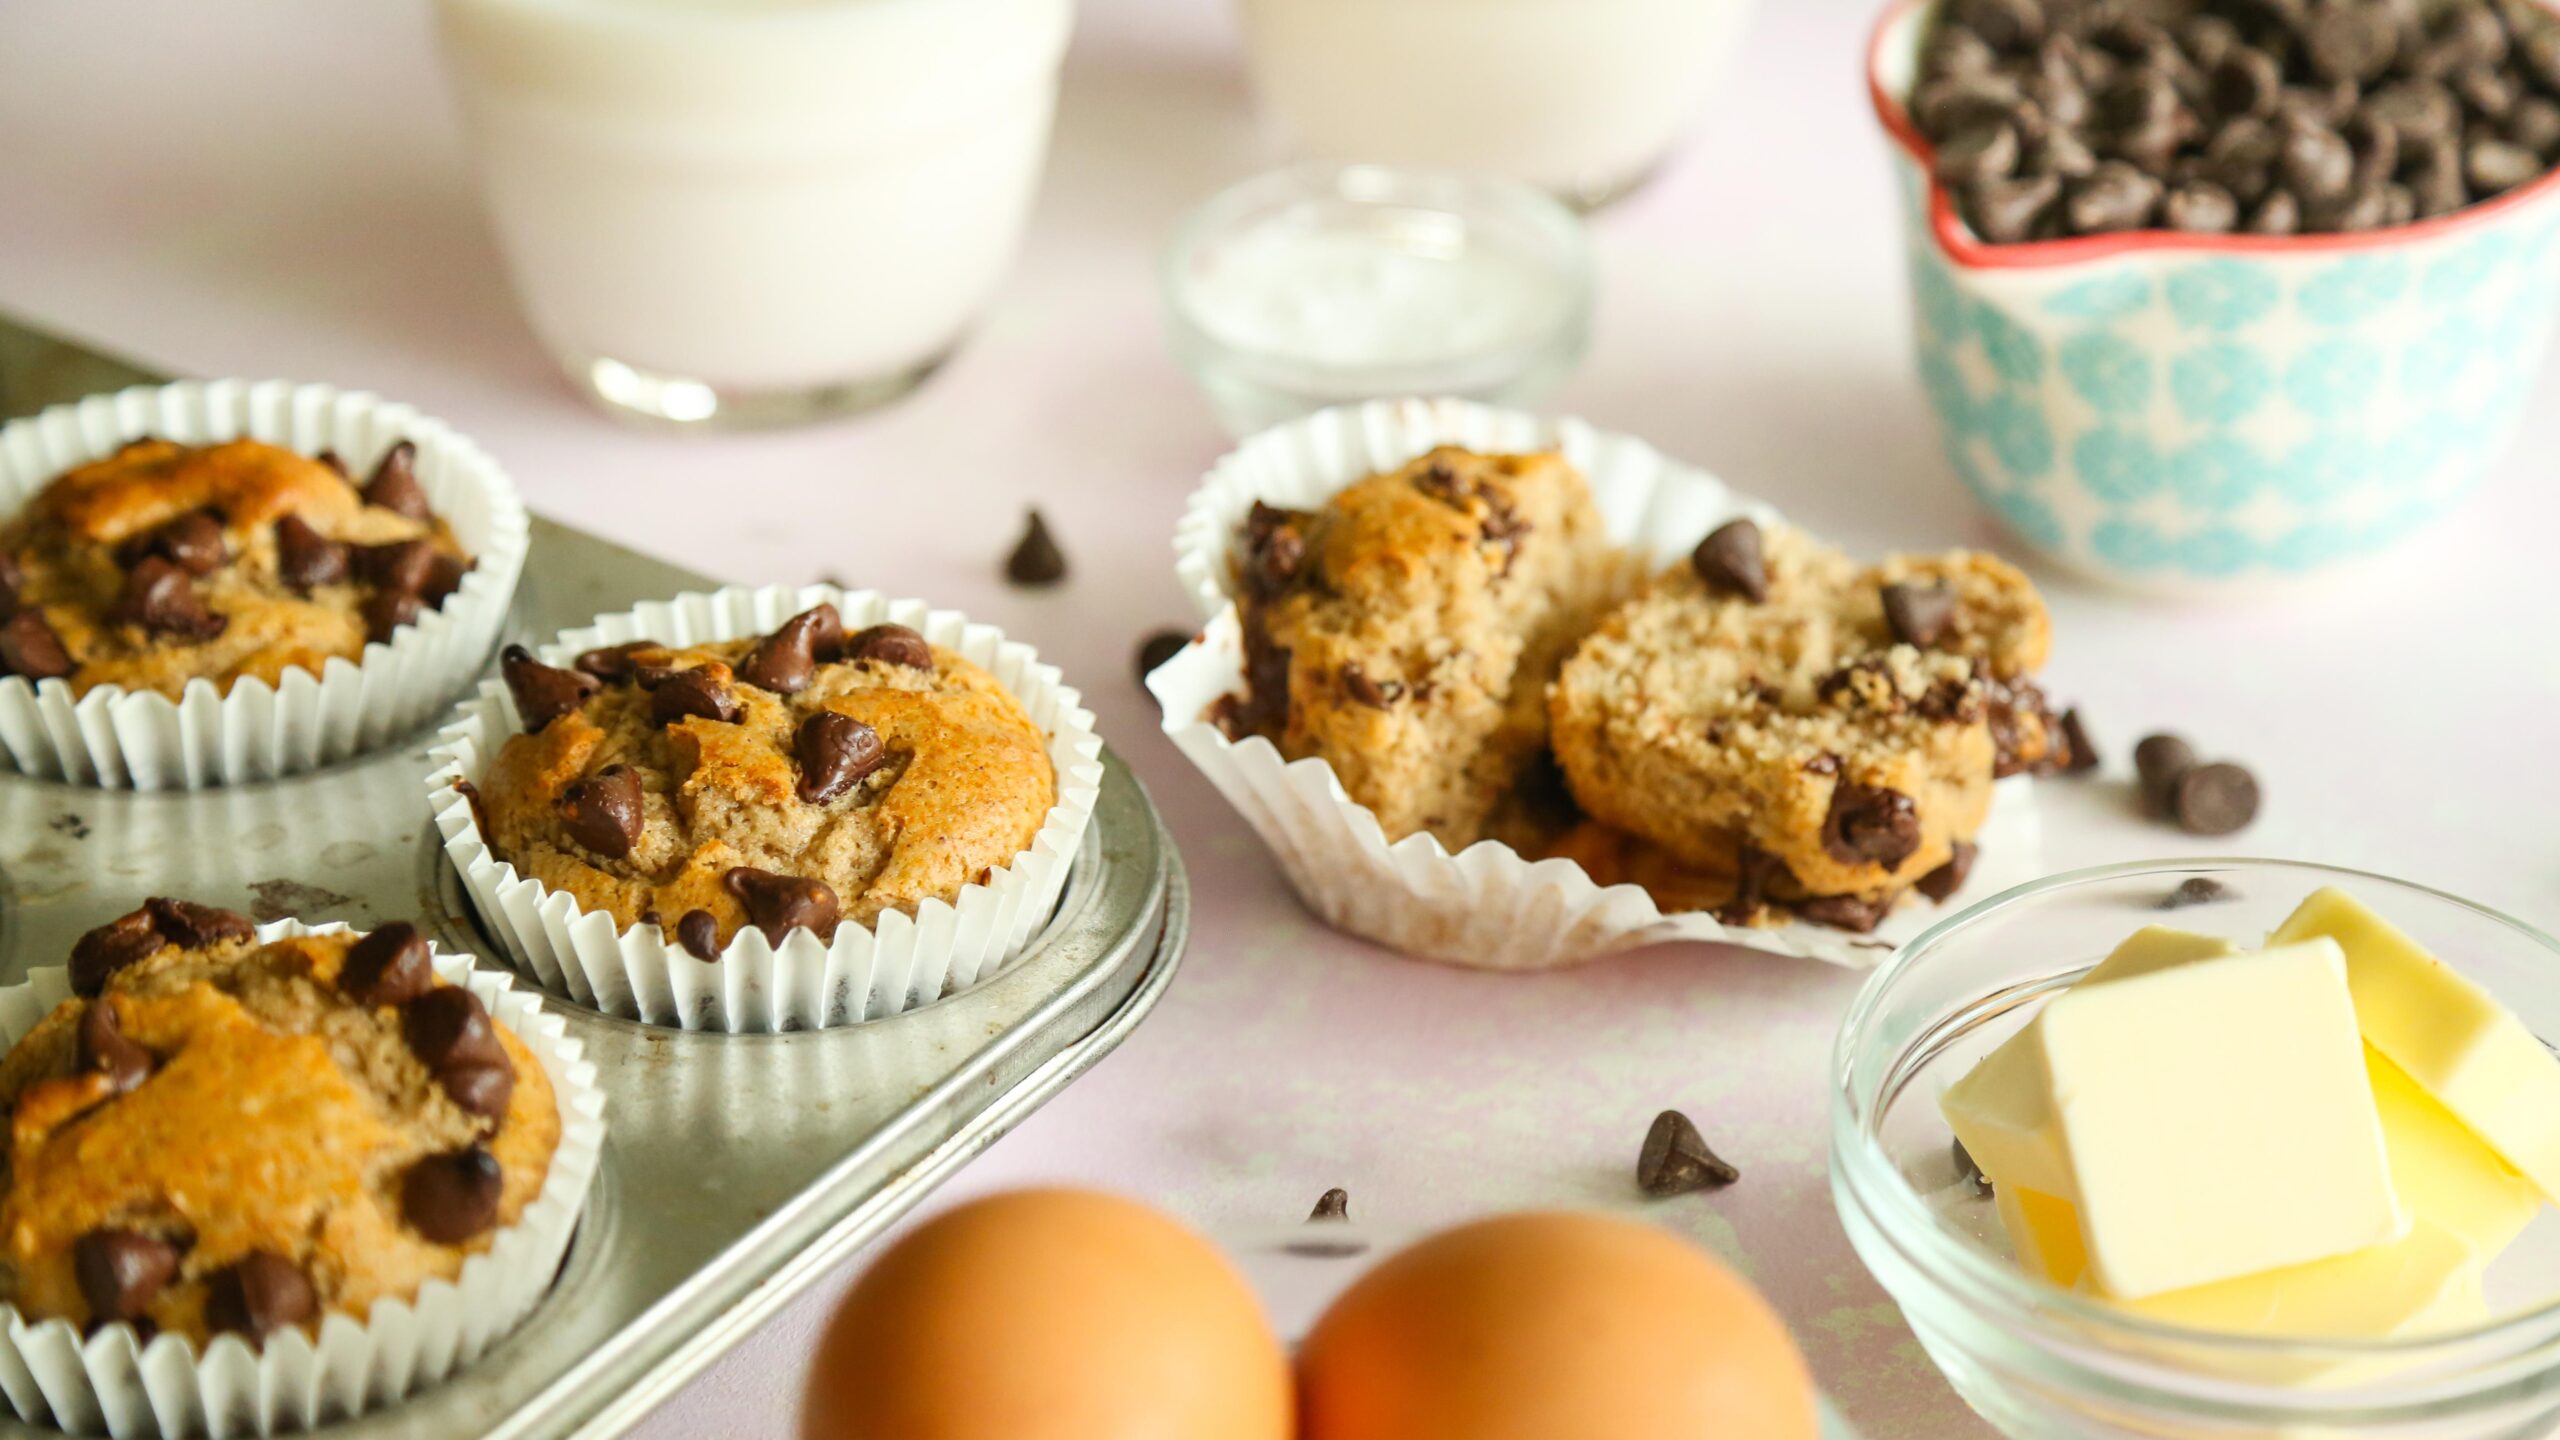  These cappuccino muffins are going to caffeinate your day